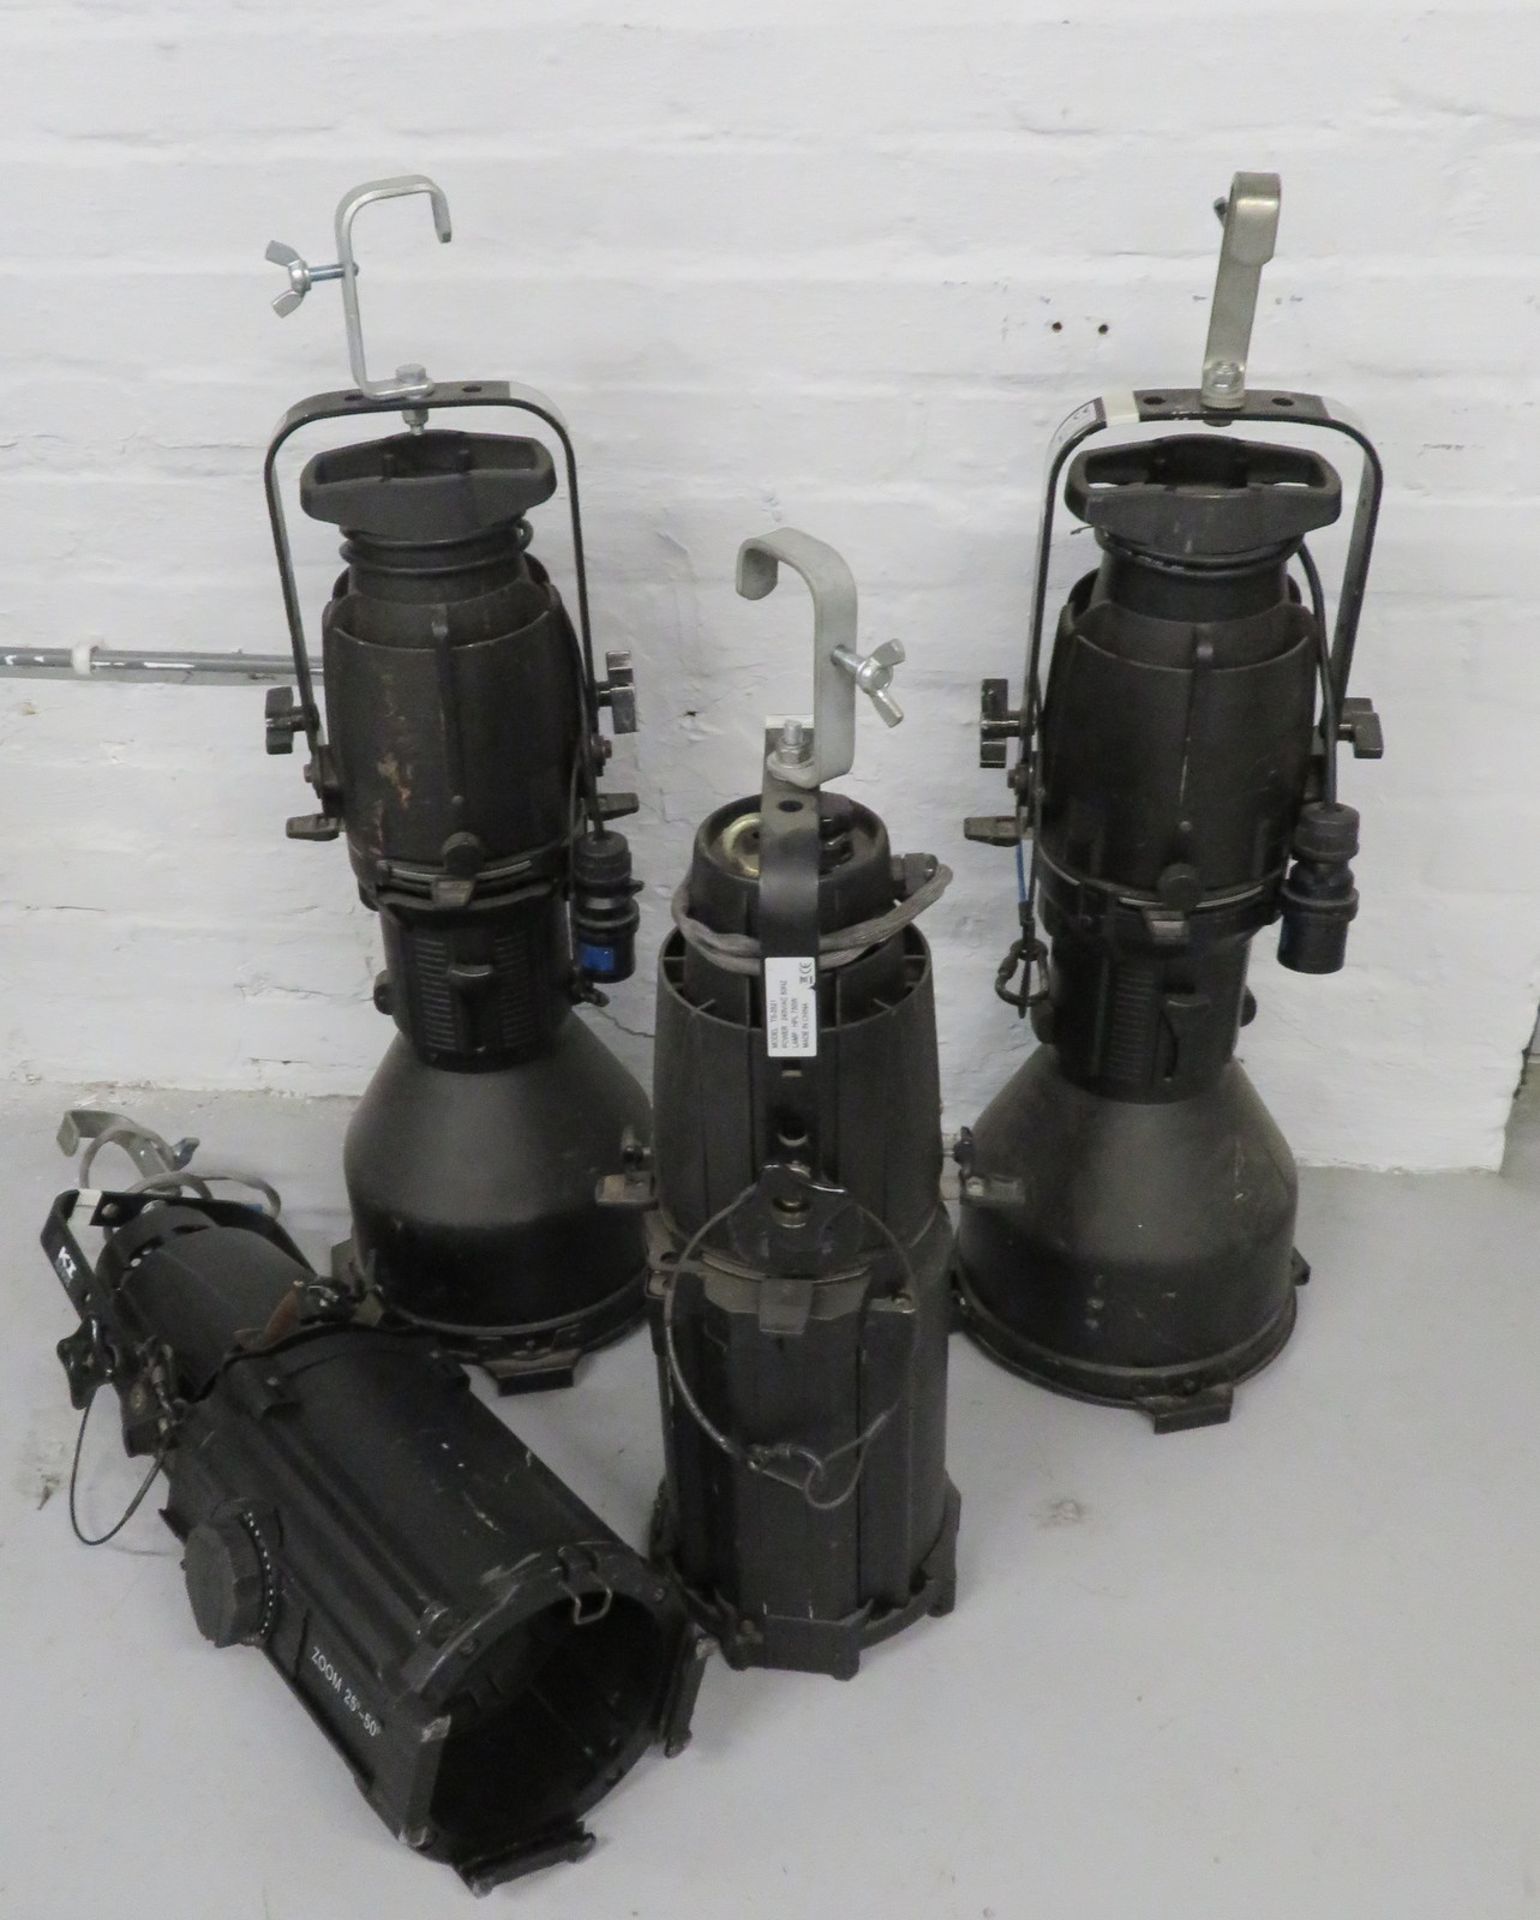 4x Moonlight 750 Profiles warying lenses. Includes hanging clamps and safety bonds. Workin